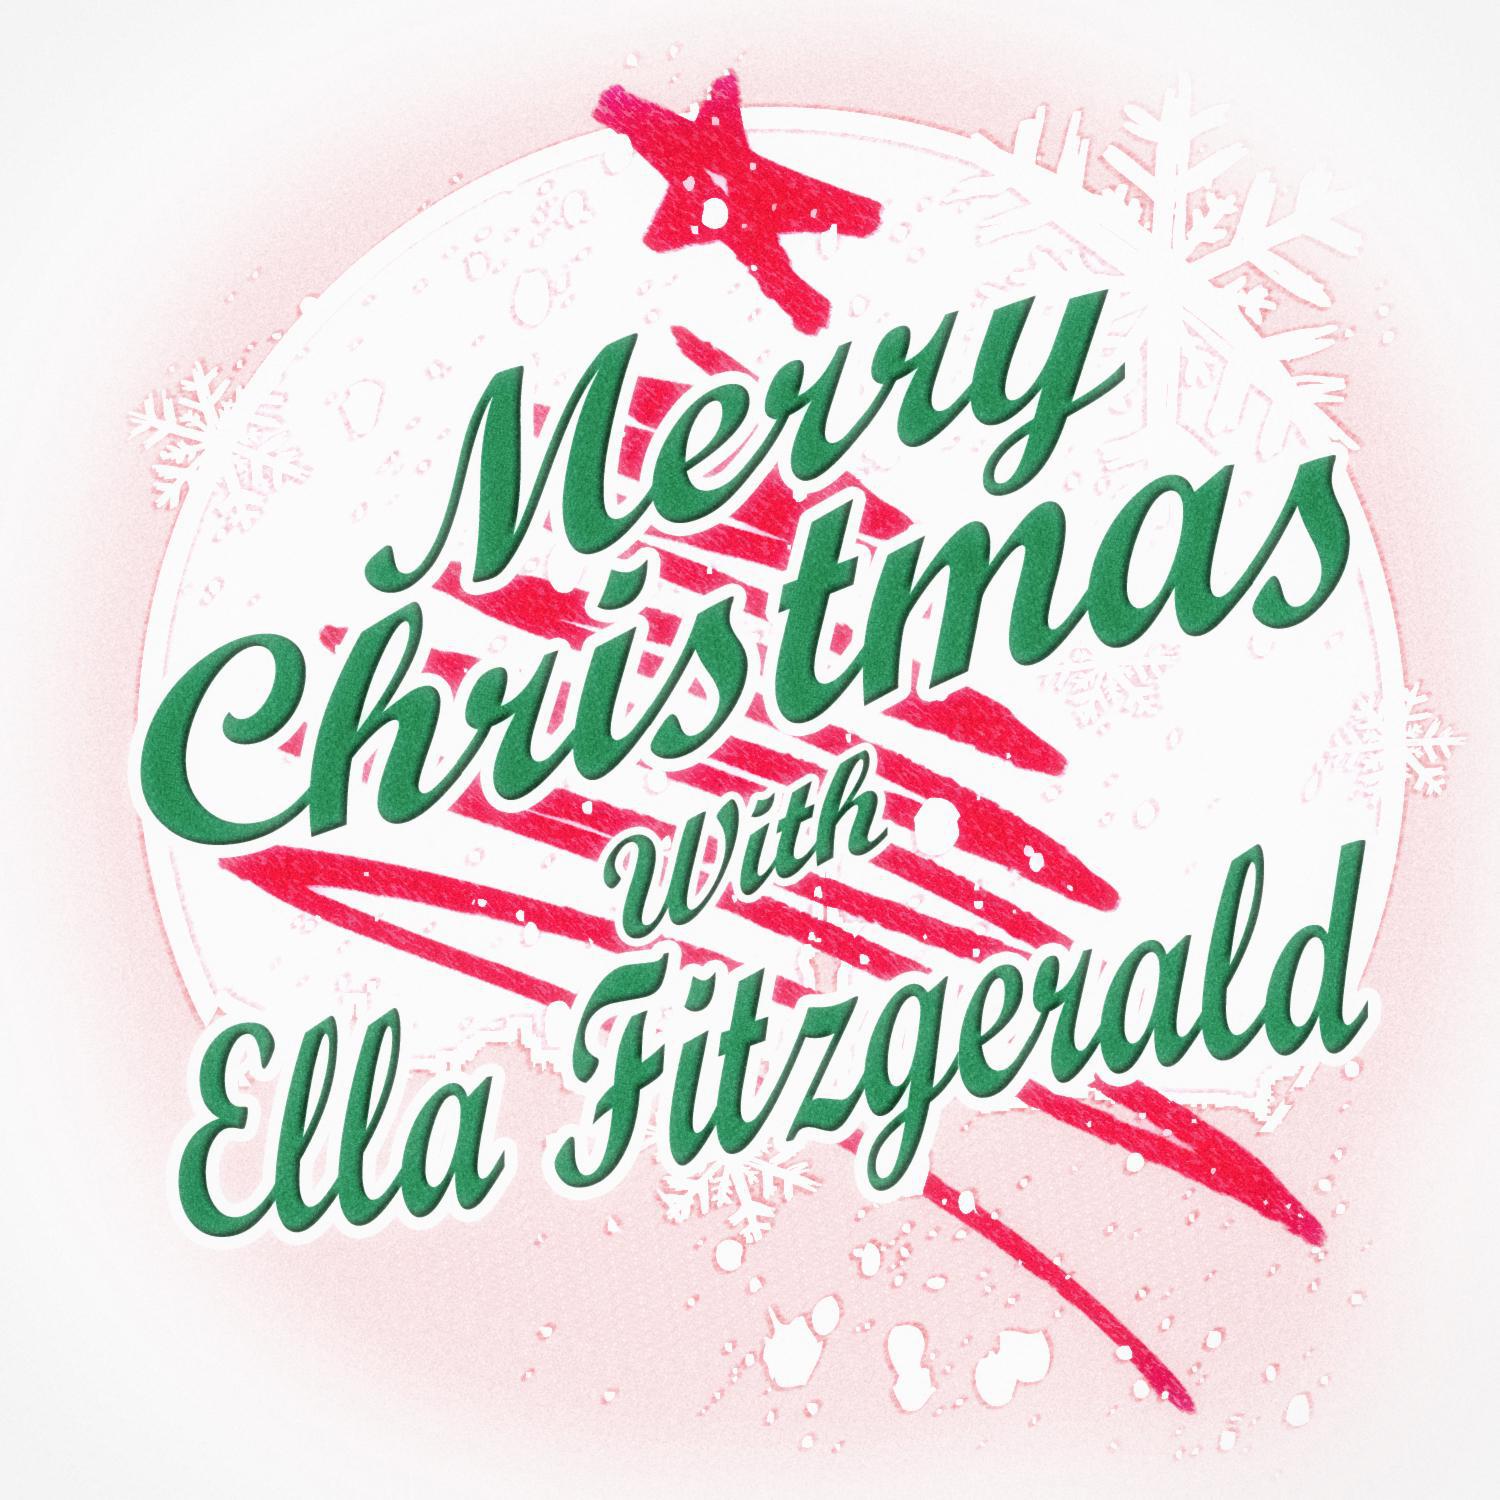 Merry Christmas with Ella Fitzgerald专辑